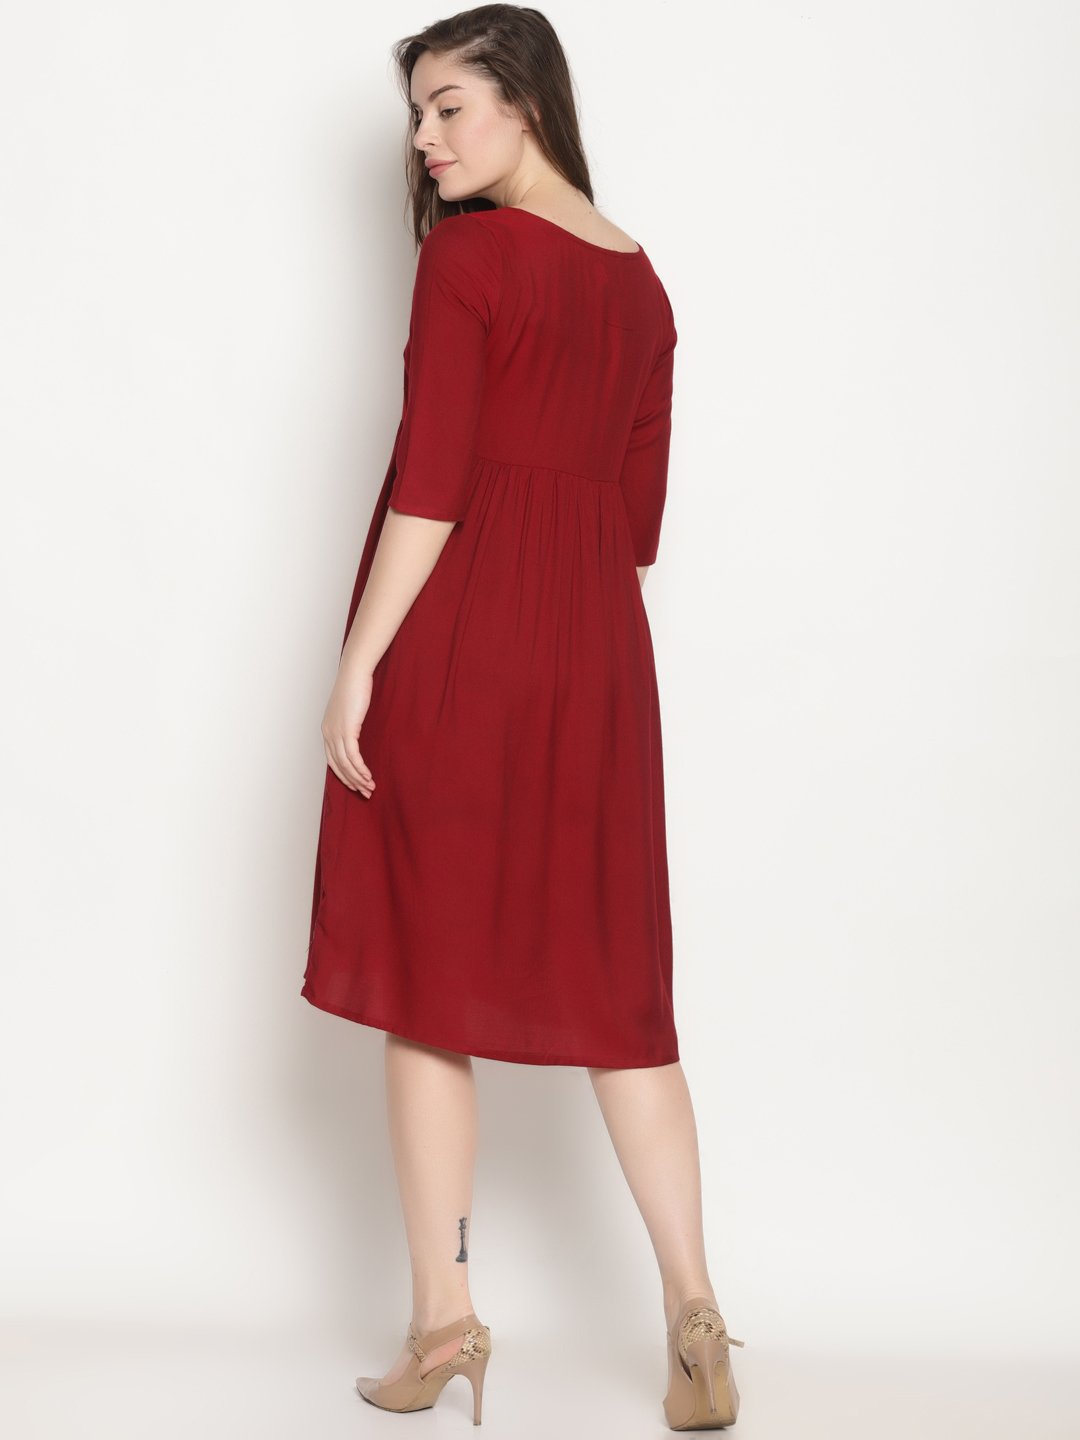 Maroon Embroidered Shift Dress | Untung